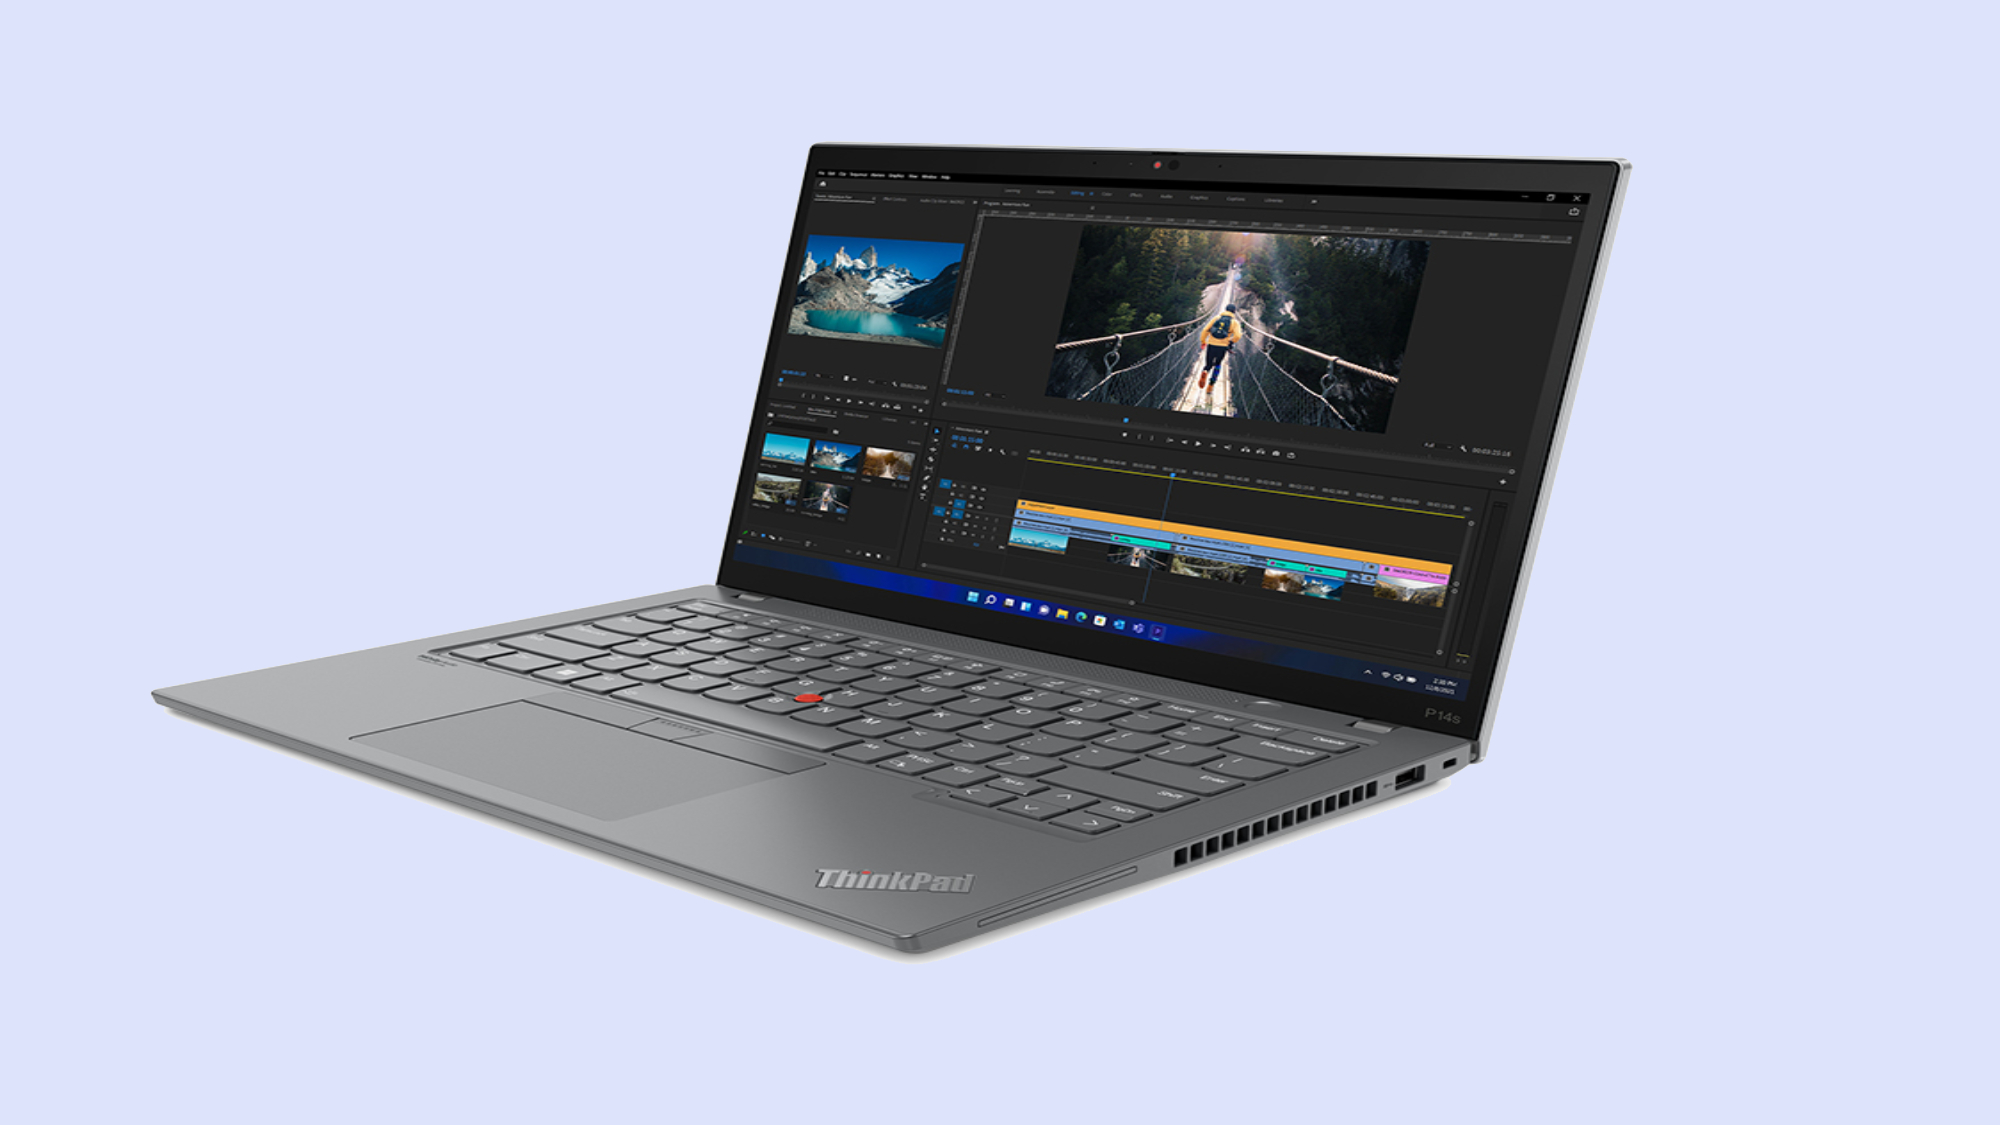 DELA DISCOUNT 966iSEj8GhtiSDJ2VG8d5f Lenovo announces new ThinkPads at MWC Barcelona 2022 — one is the world's first Snapdragon 8cx Gen 3 laptop DELA DISCOUNT  